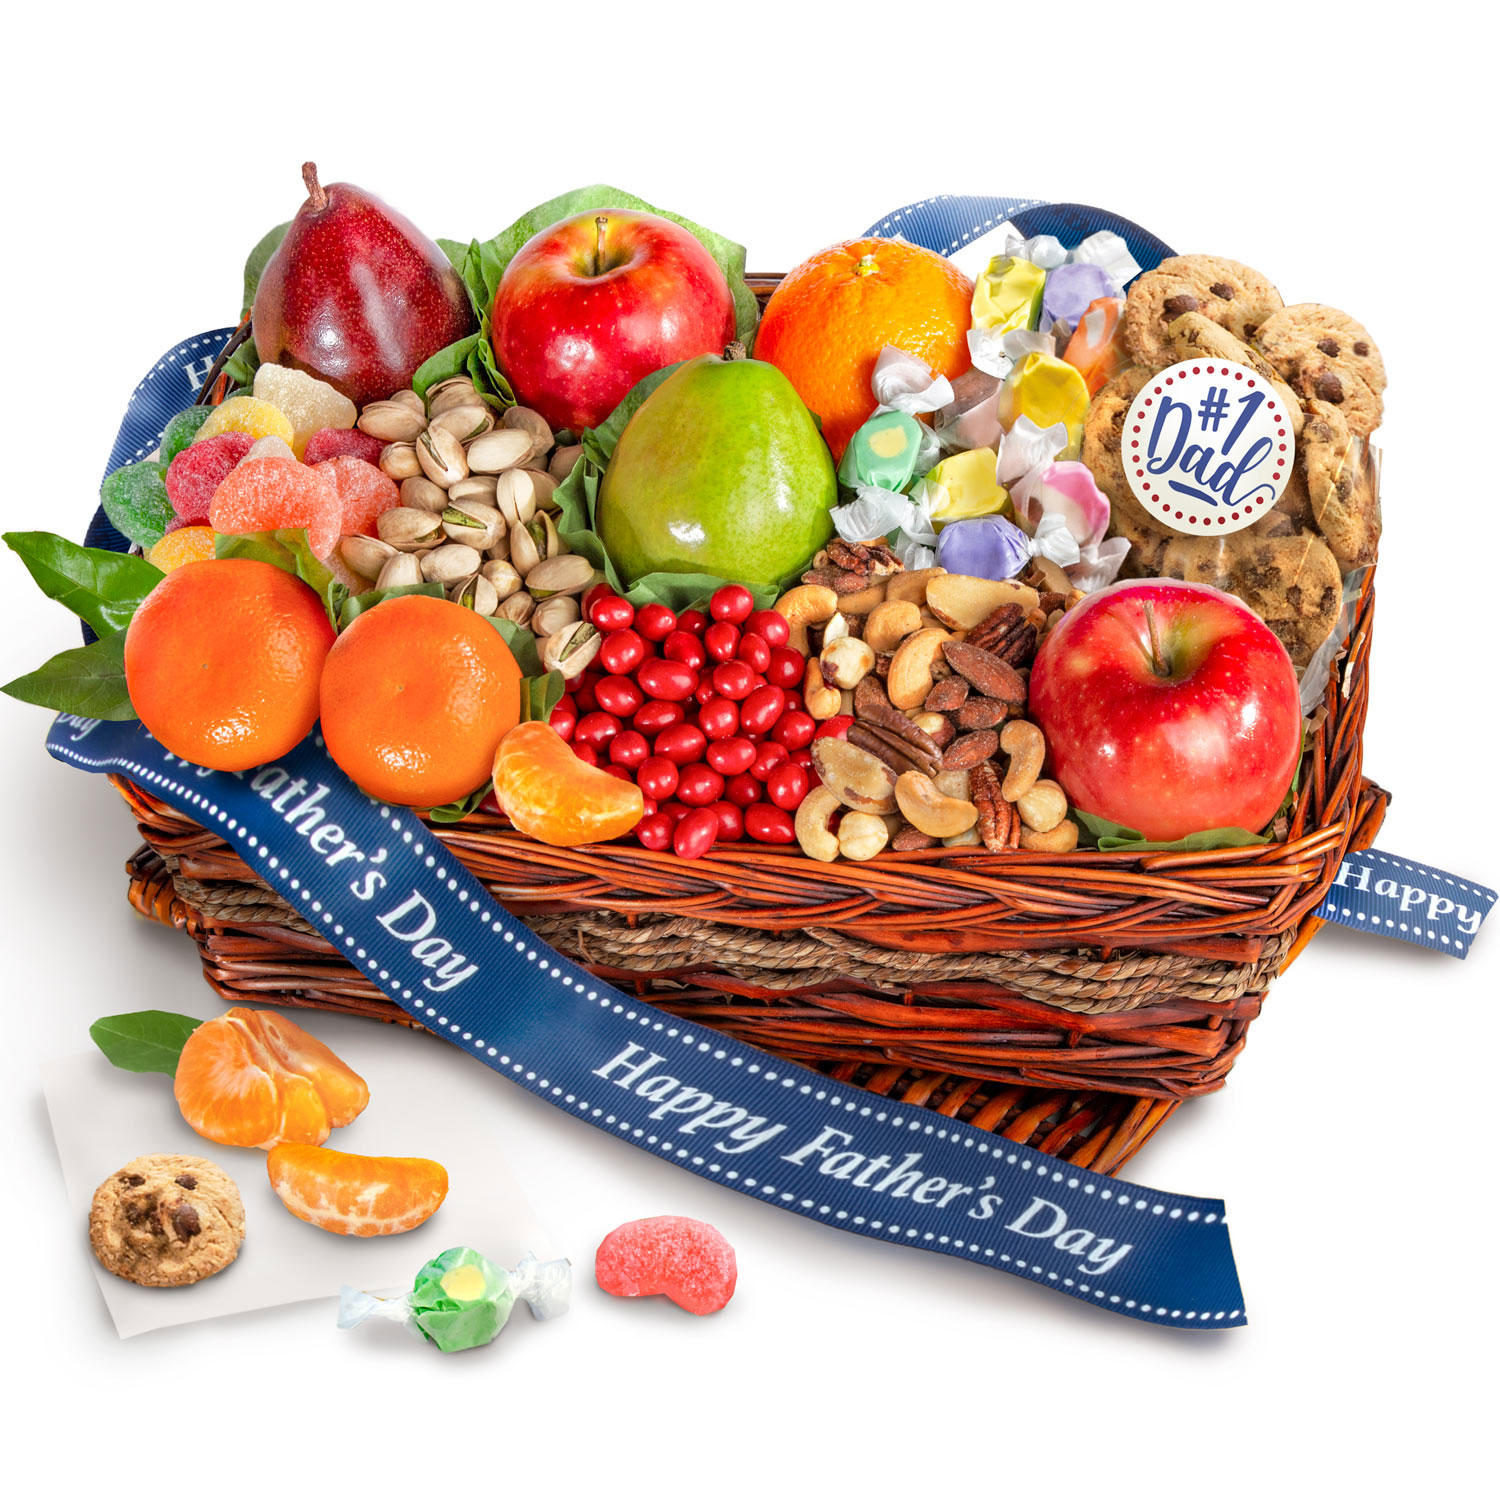 Father's Day Fruit and Snacks Gift Basket by Golden State Fruit